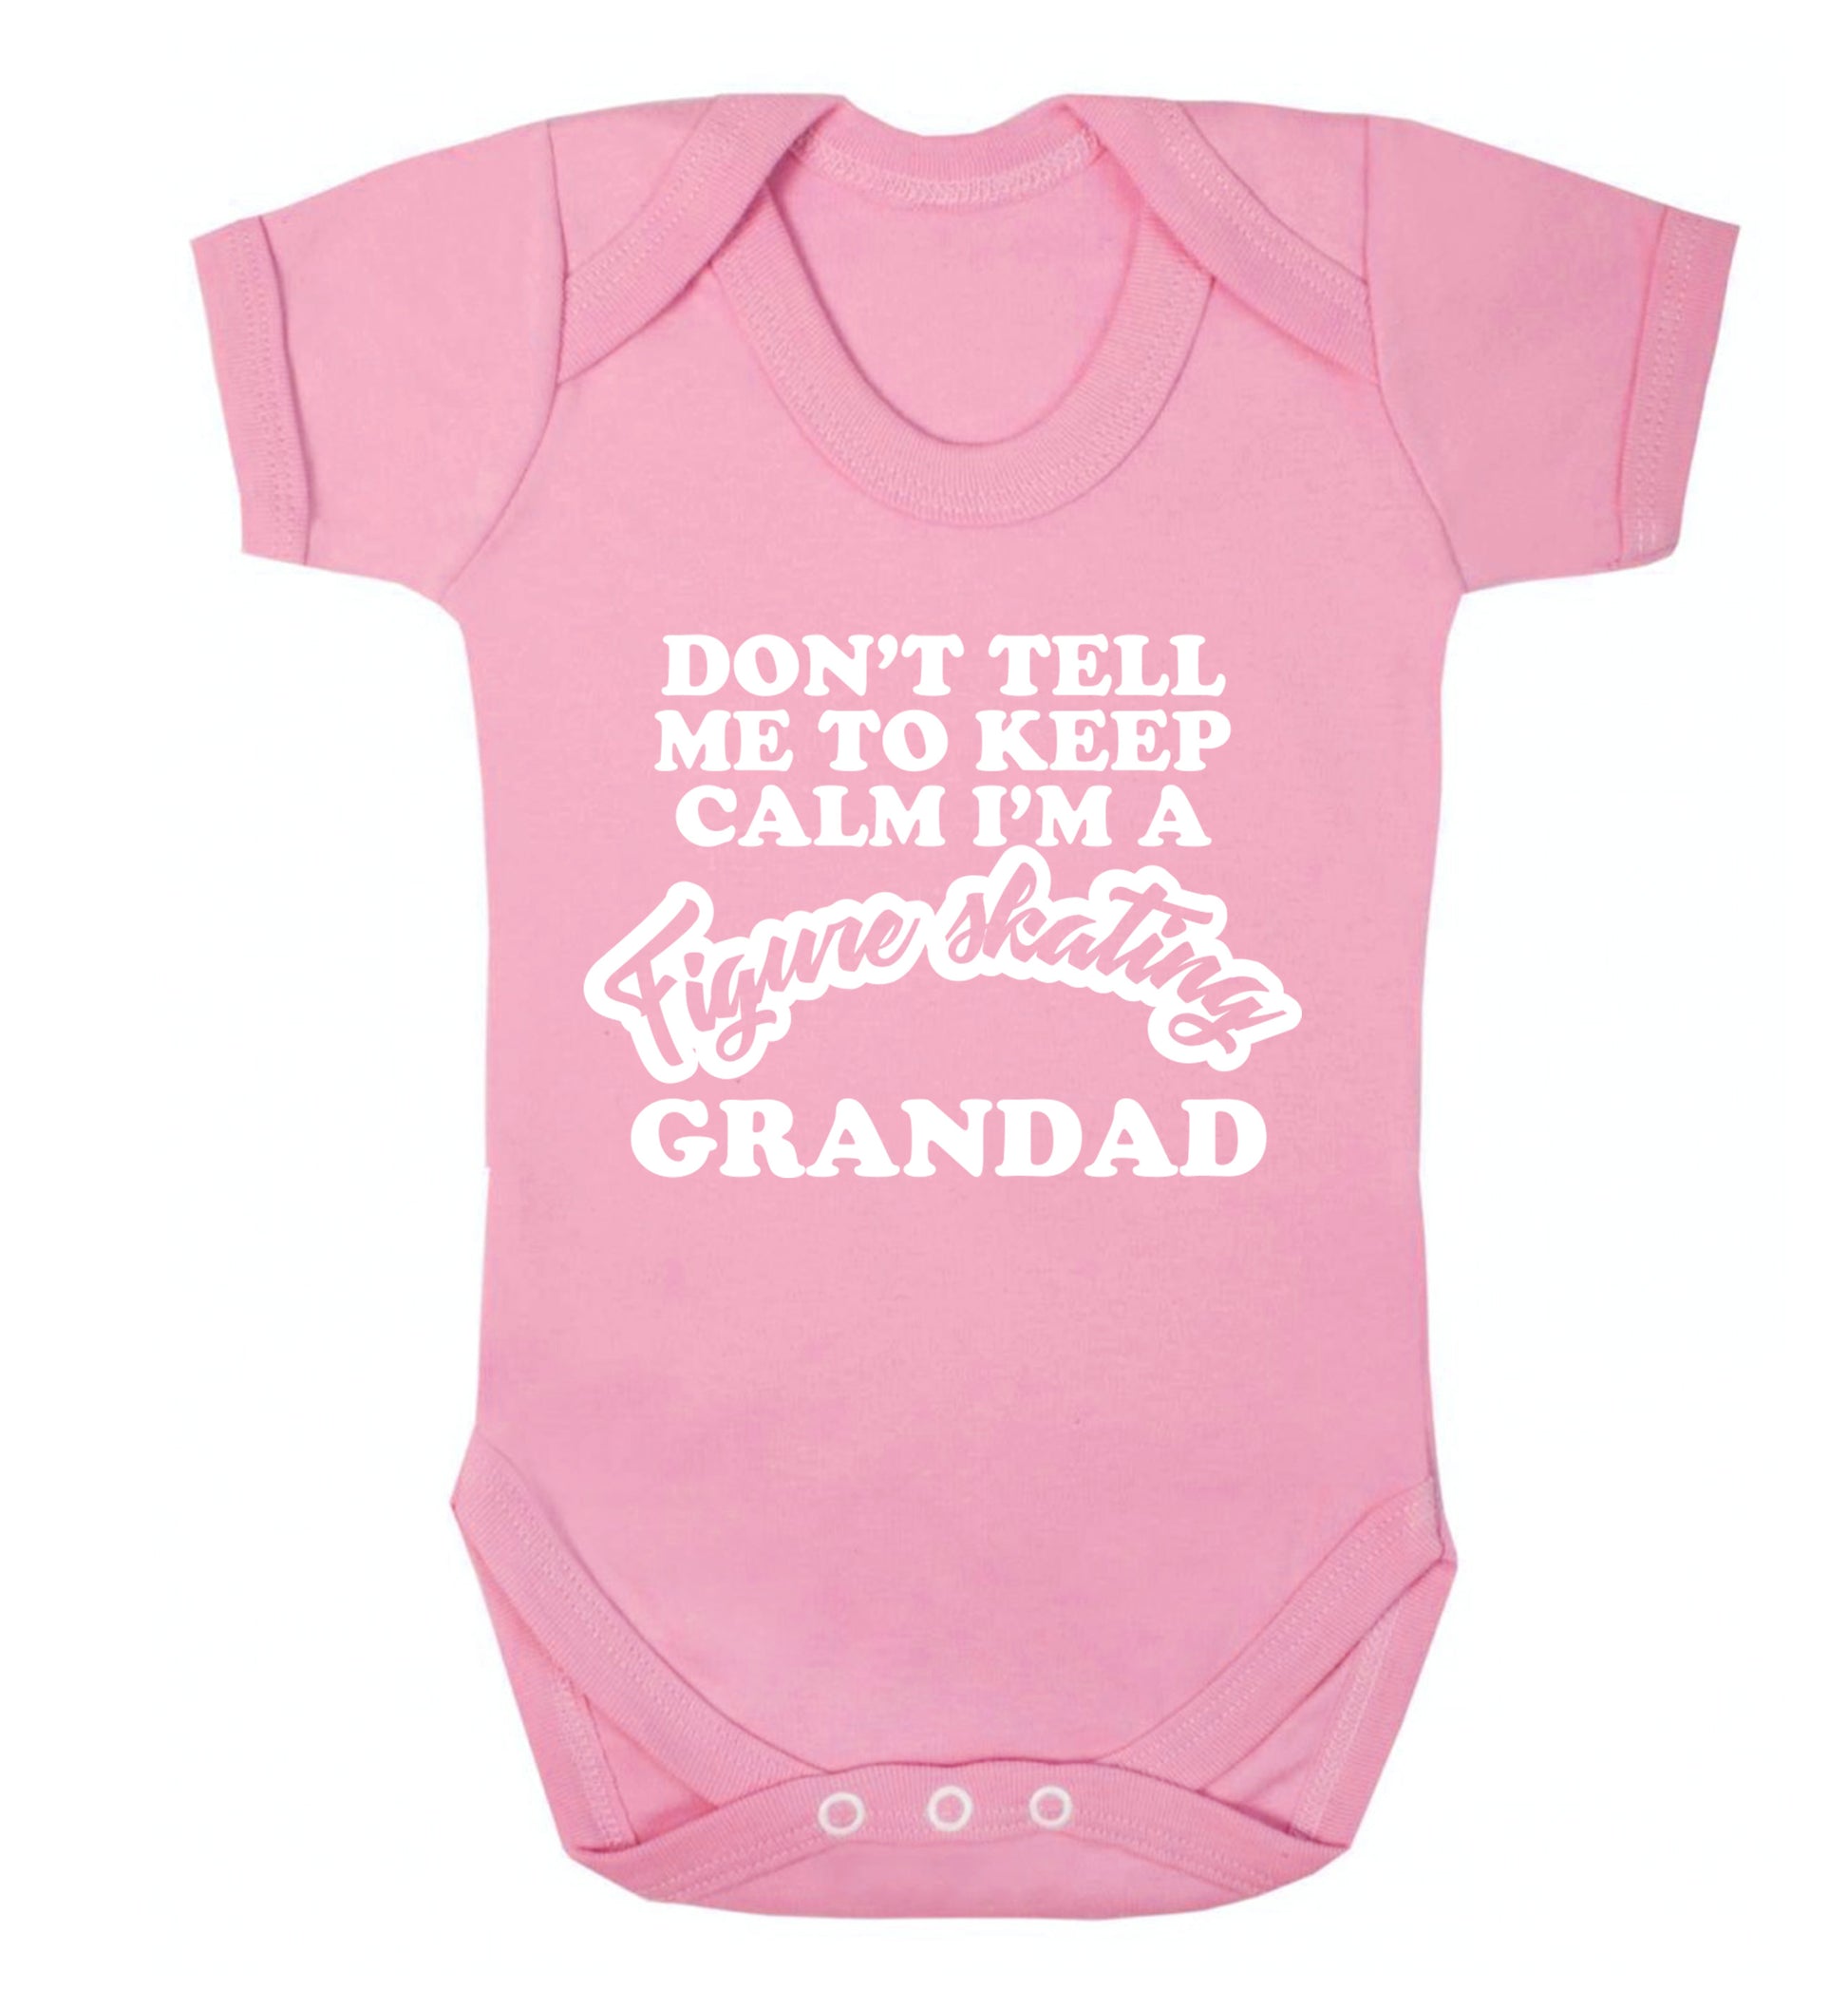 Don't tell me to keep calm I'm a figure skating grandad Baby Vest pale pink 18-24 months